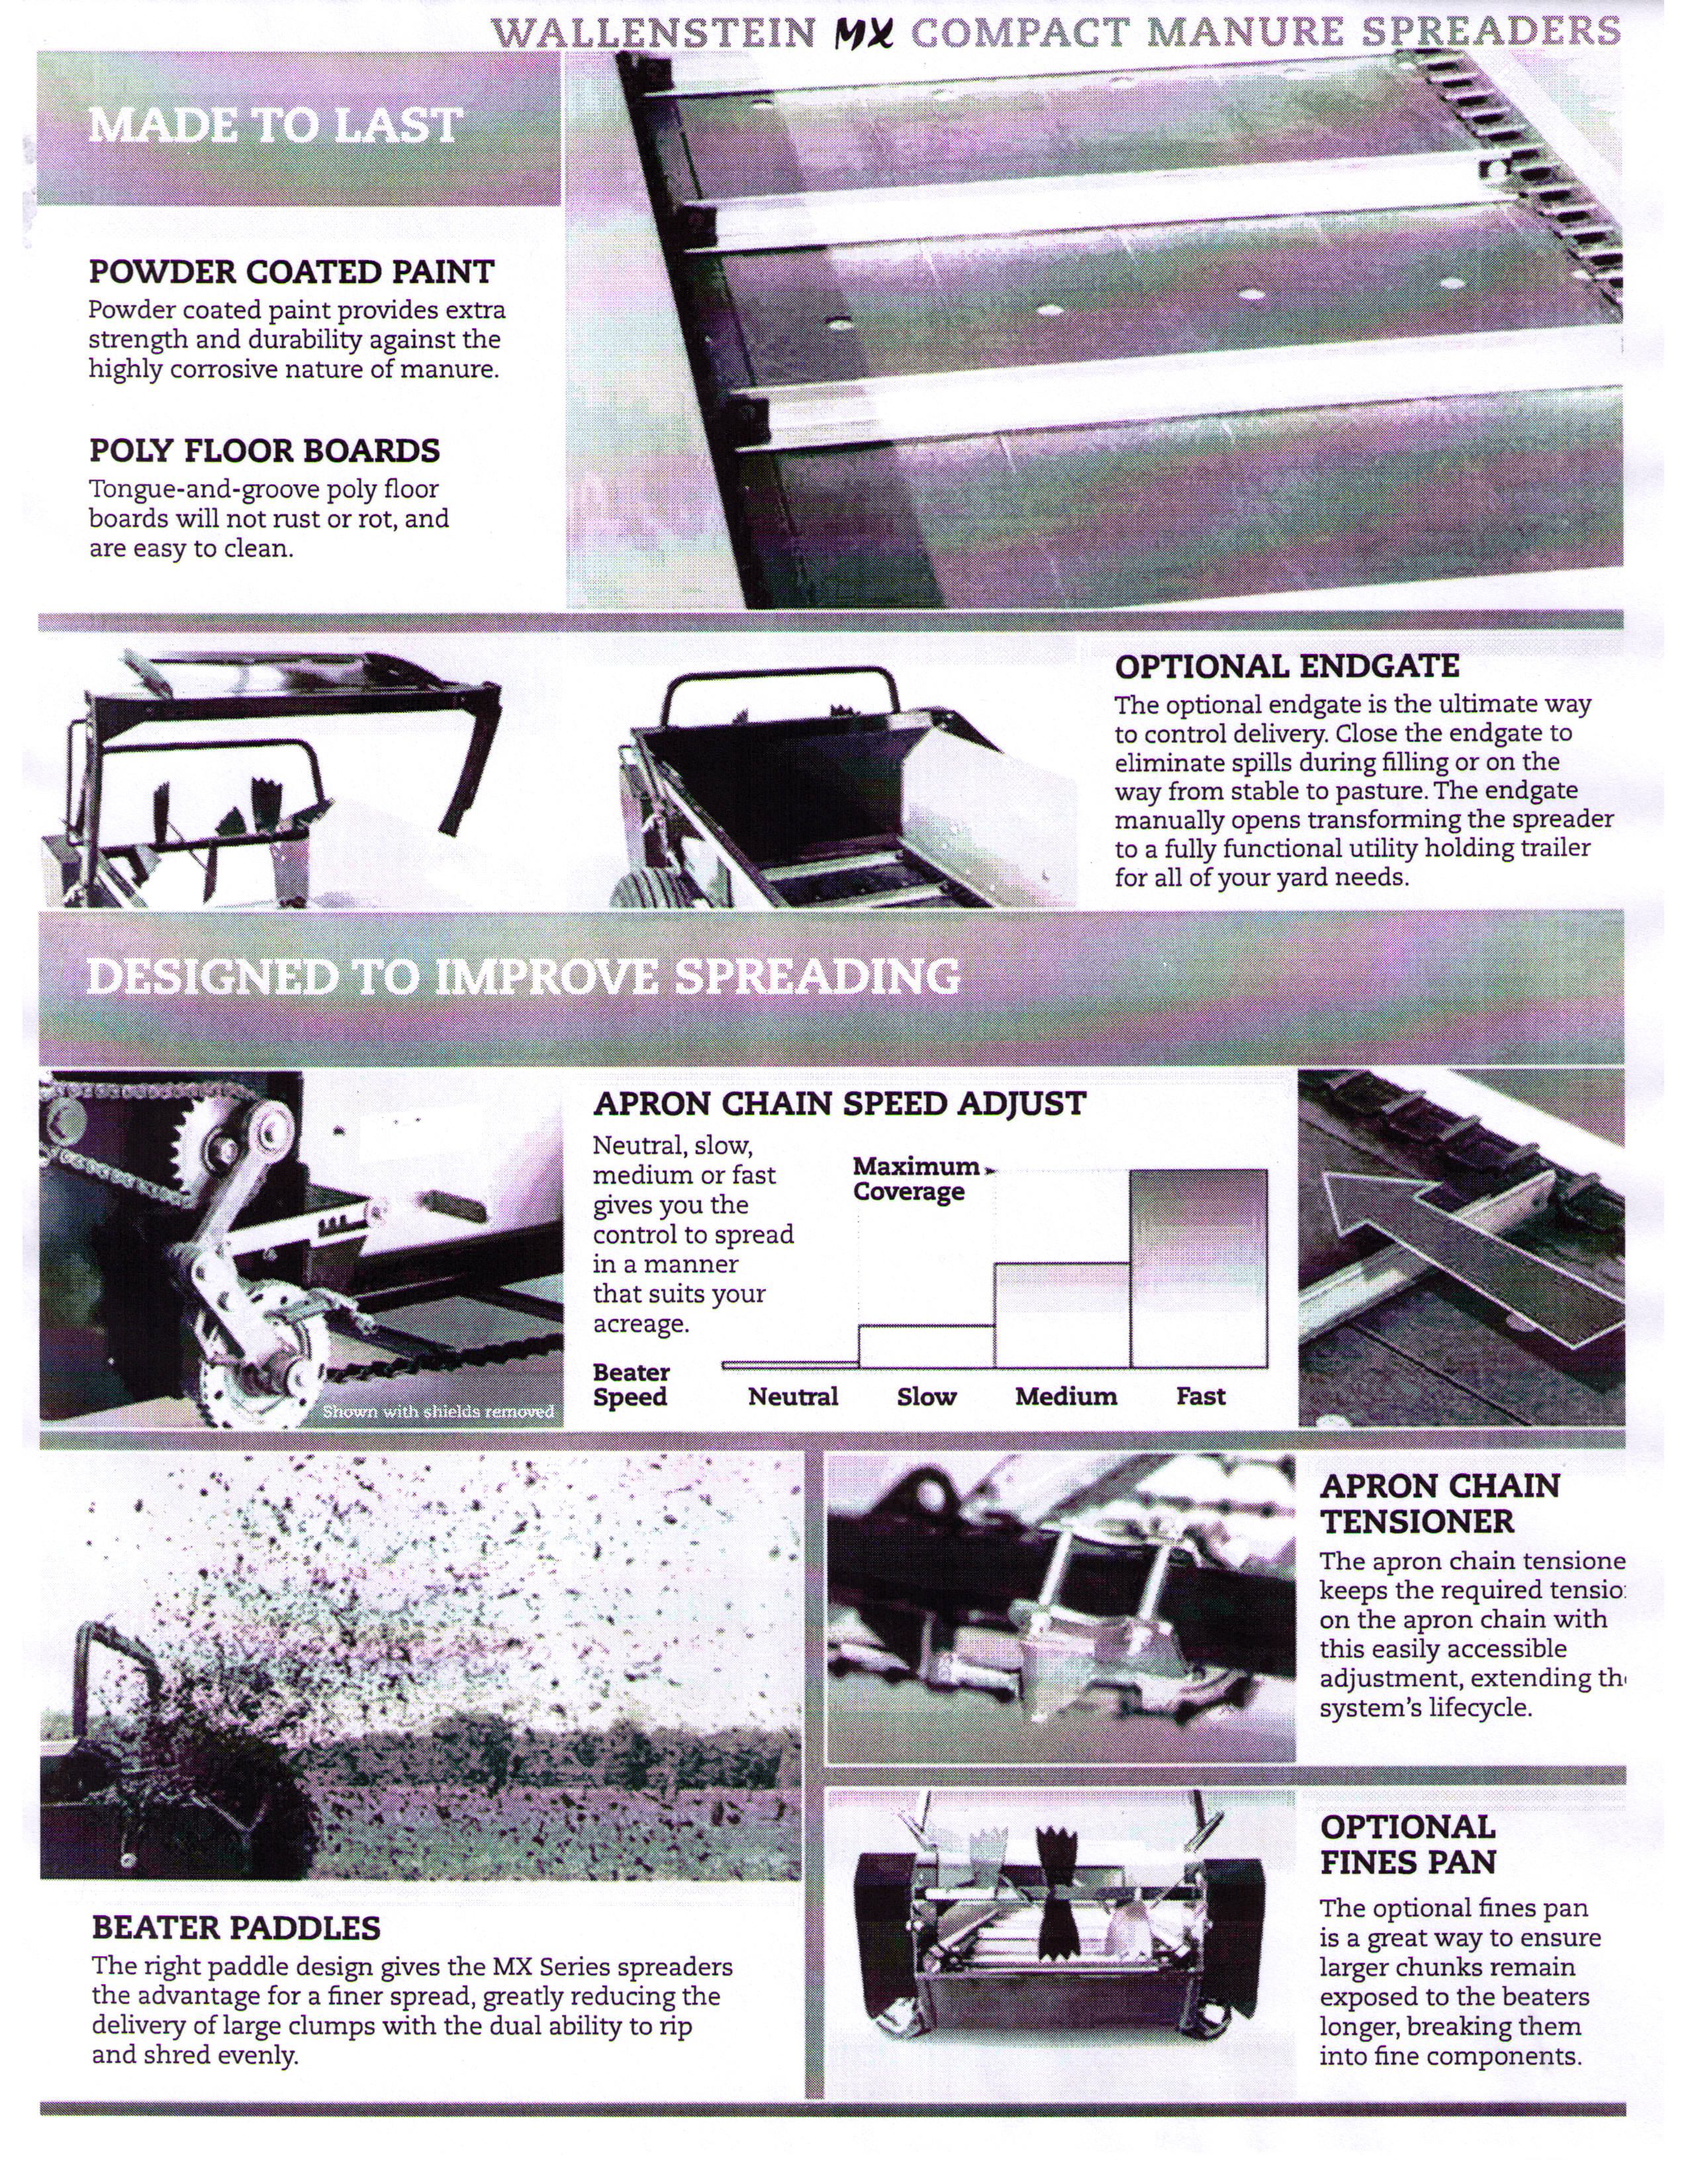 Features Of MX Series Manure Spreaders